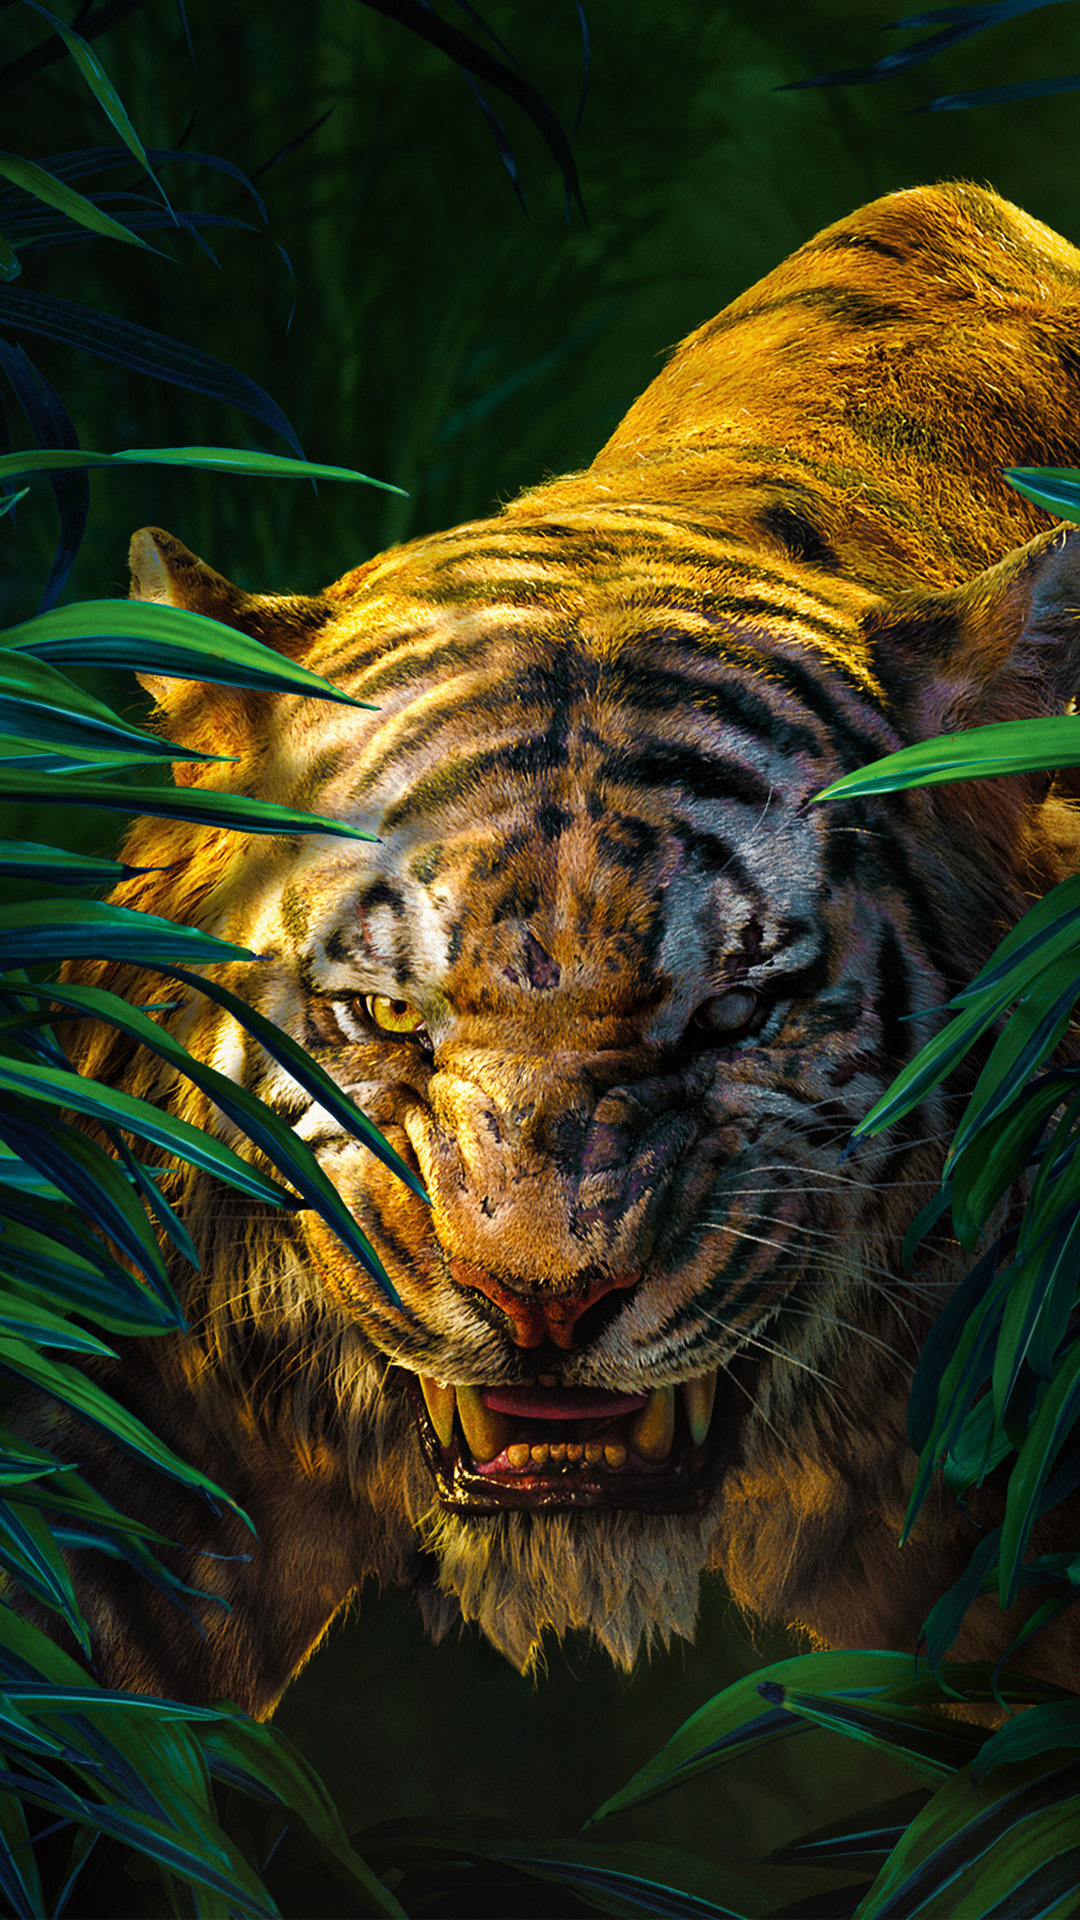 The Jungle Book 2016 Movie Wallpaper for iPhone